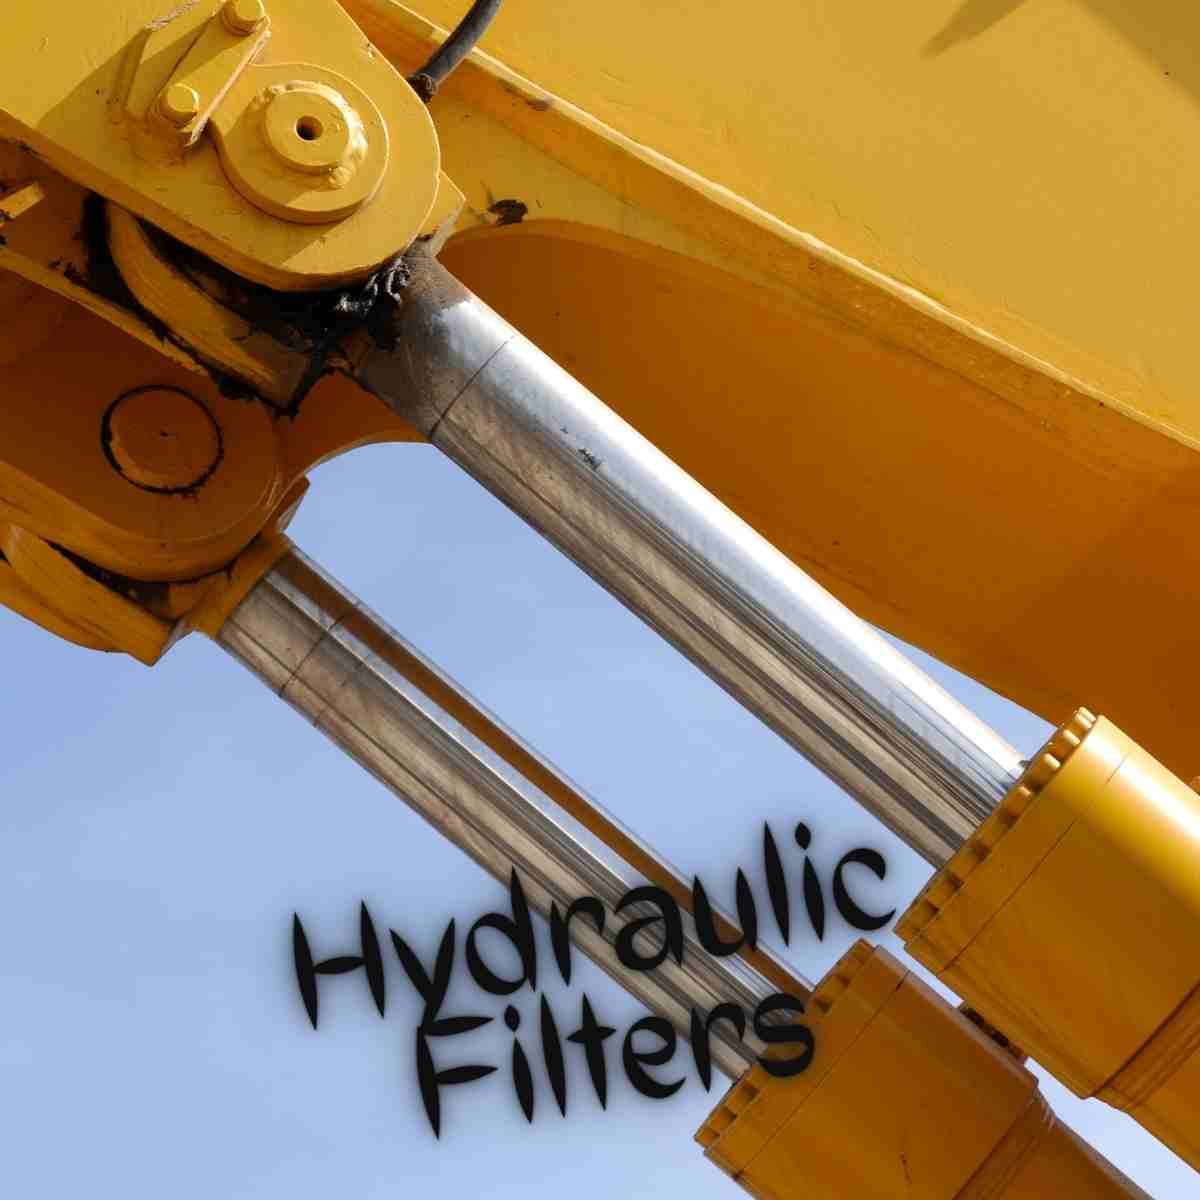 Everything You Need To Know About Hydraulic Filters